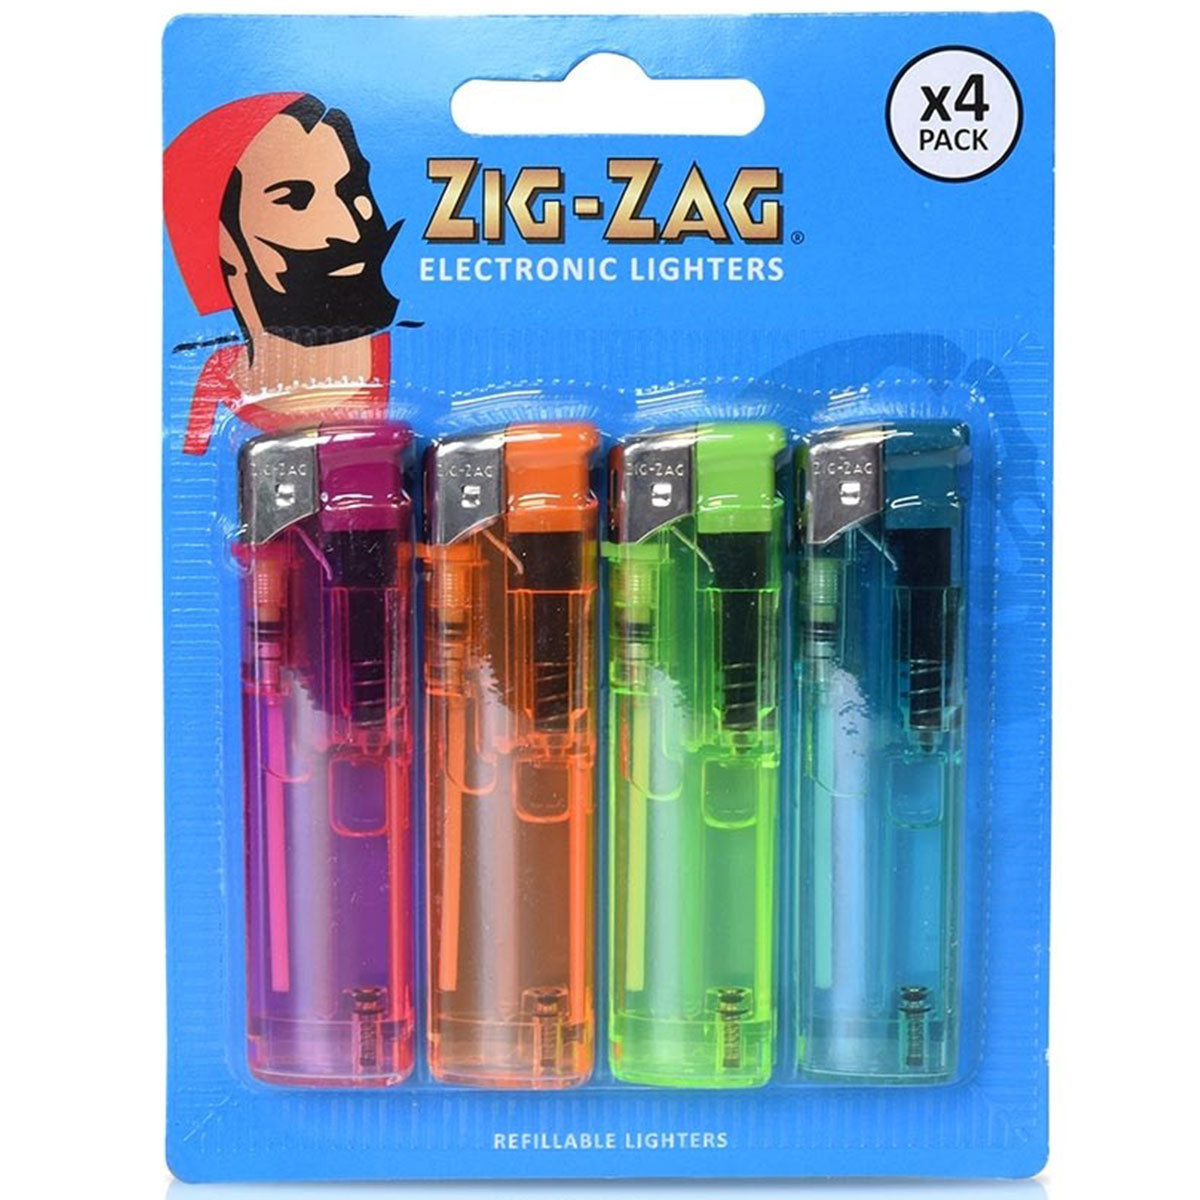 Zig-Zag - Electronic Lighters - 4pcs - Continental Food Store